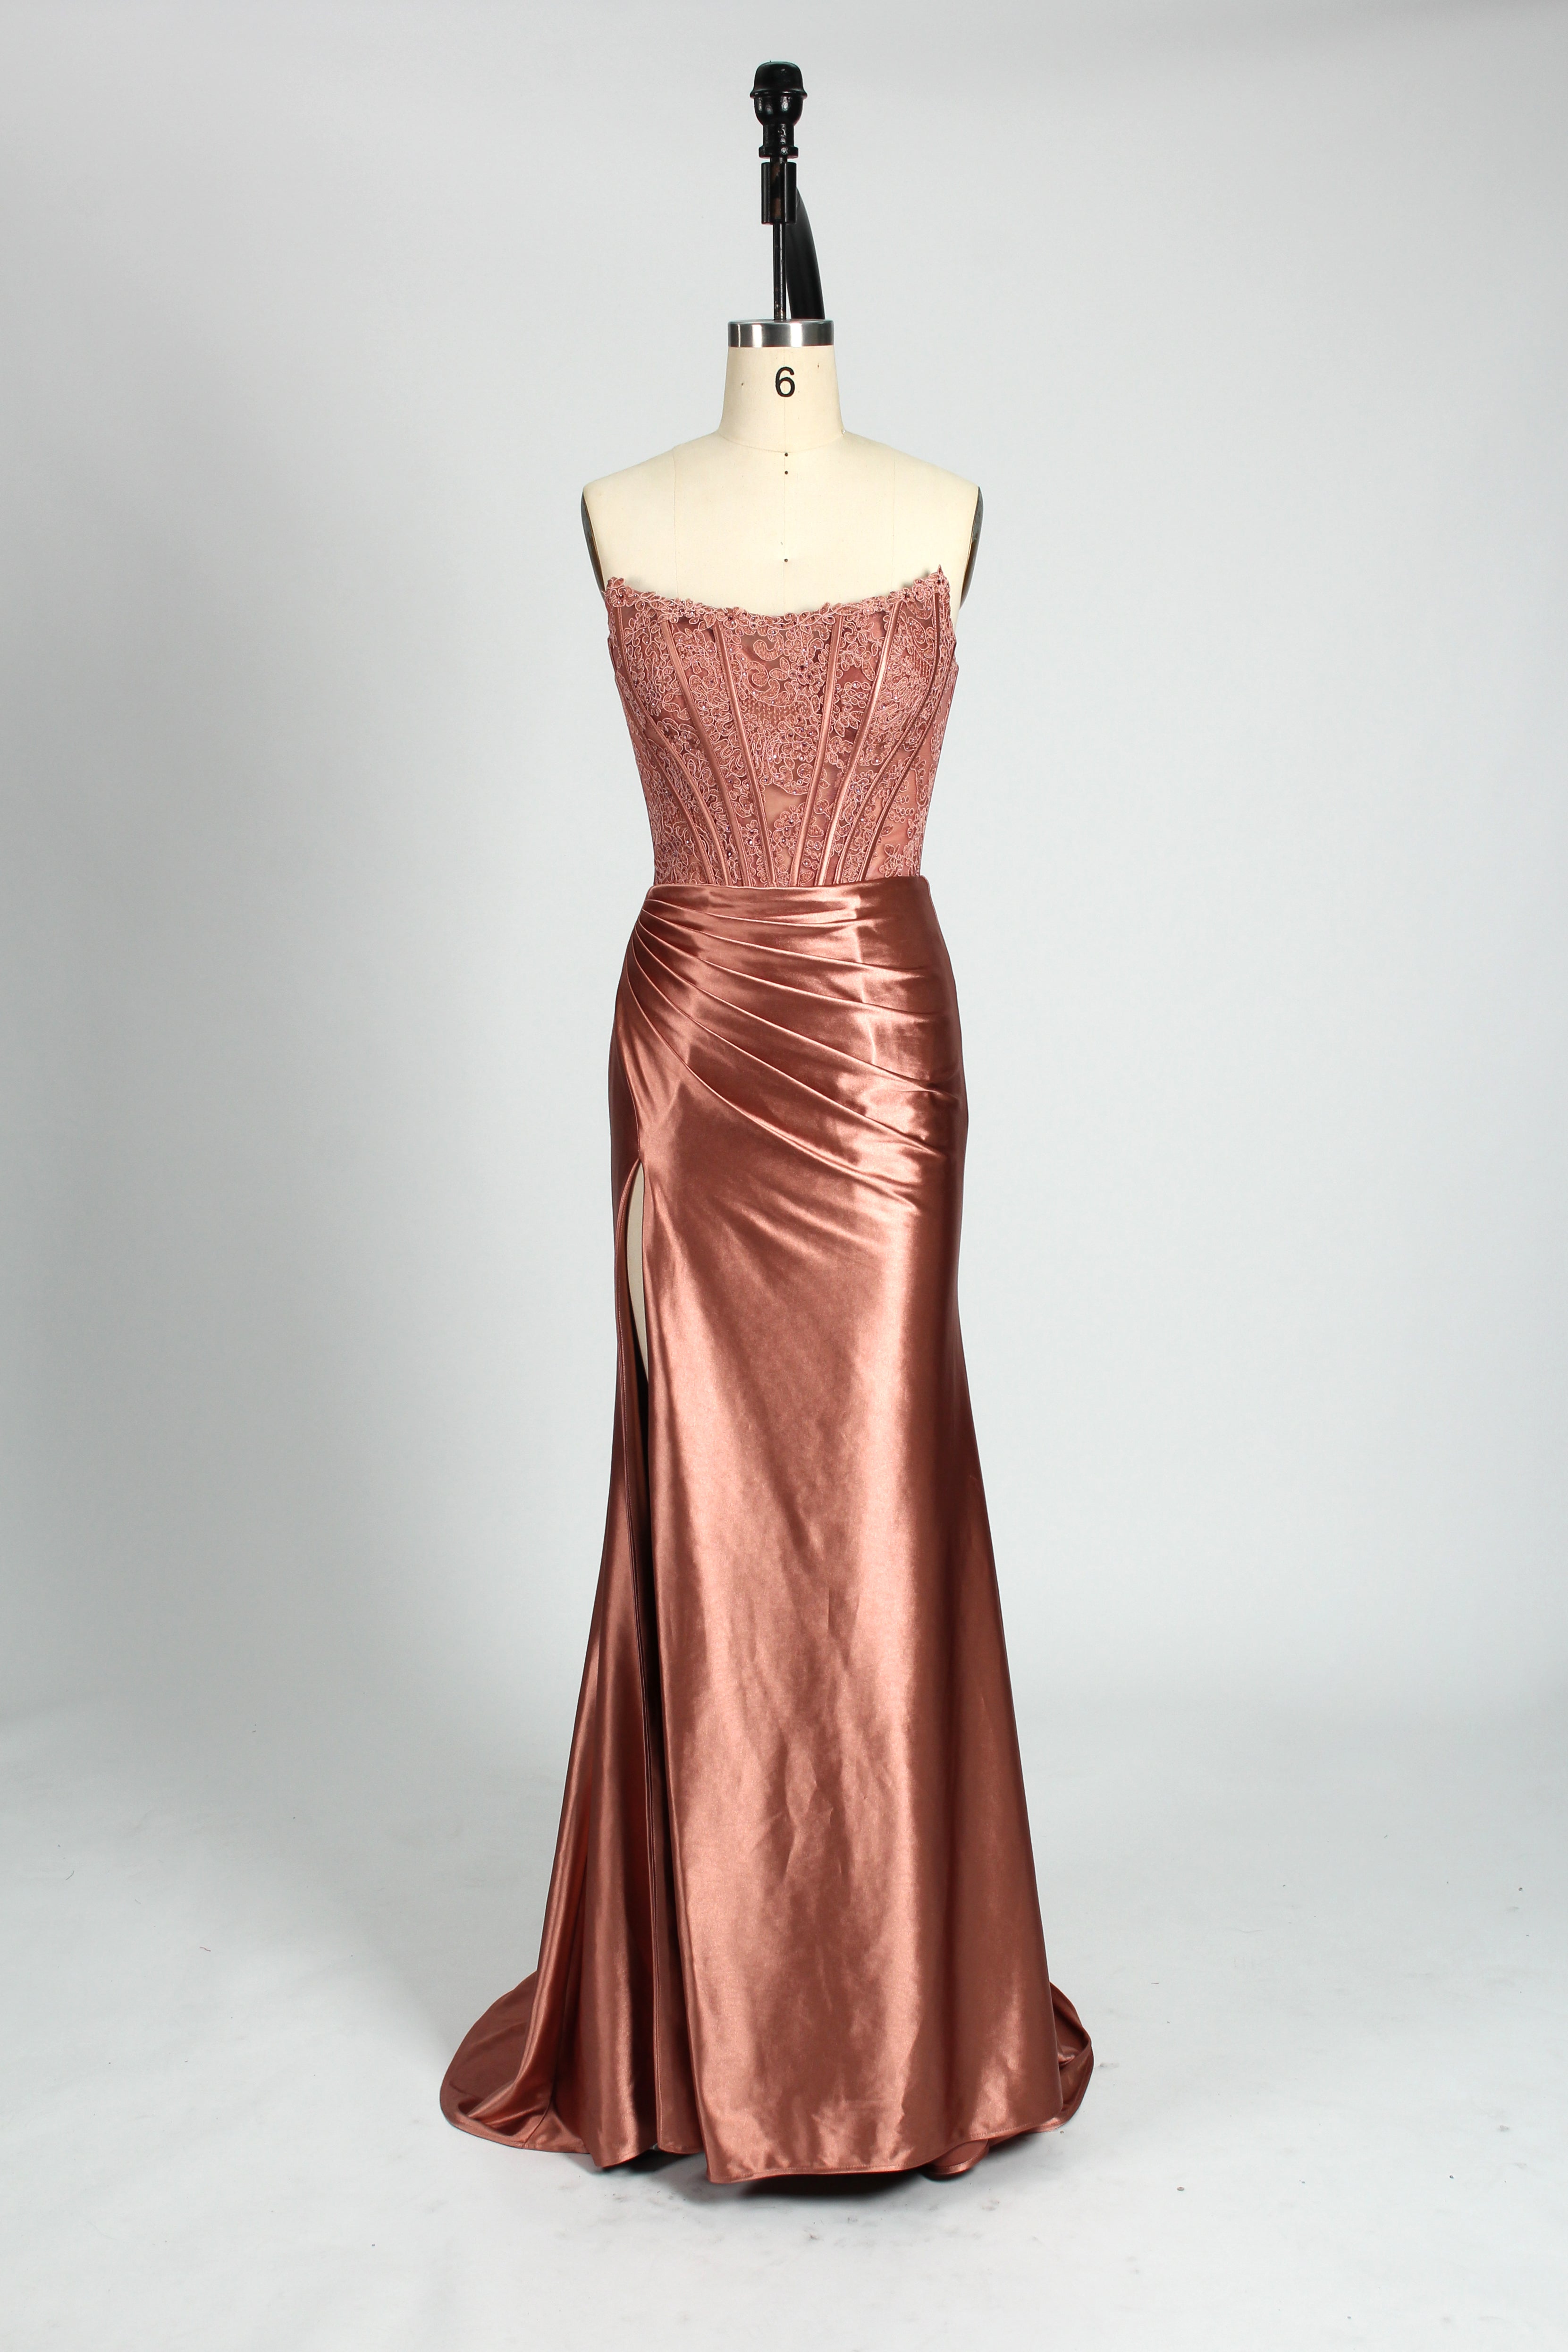 Honey Couture AUGUST Rose Gold Strapless Embellished Bustier Satin Mermaid Formal Dress